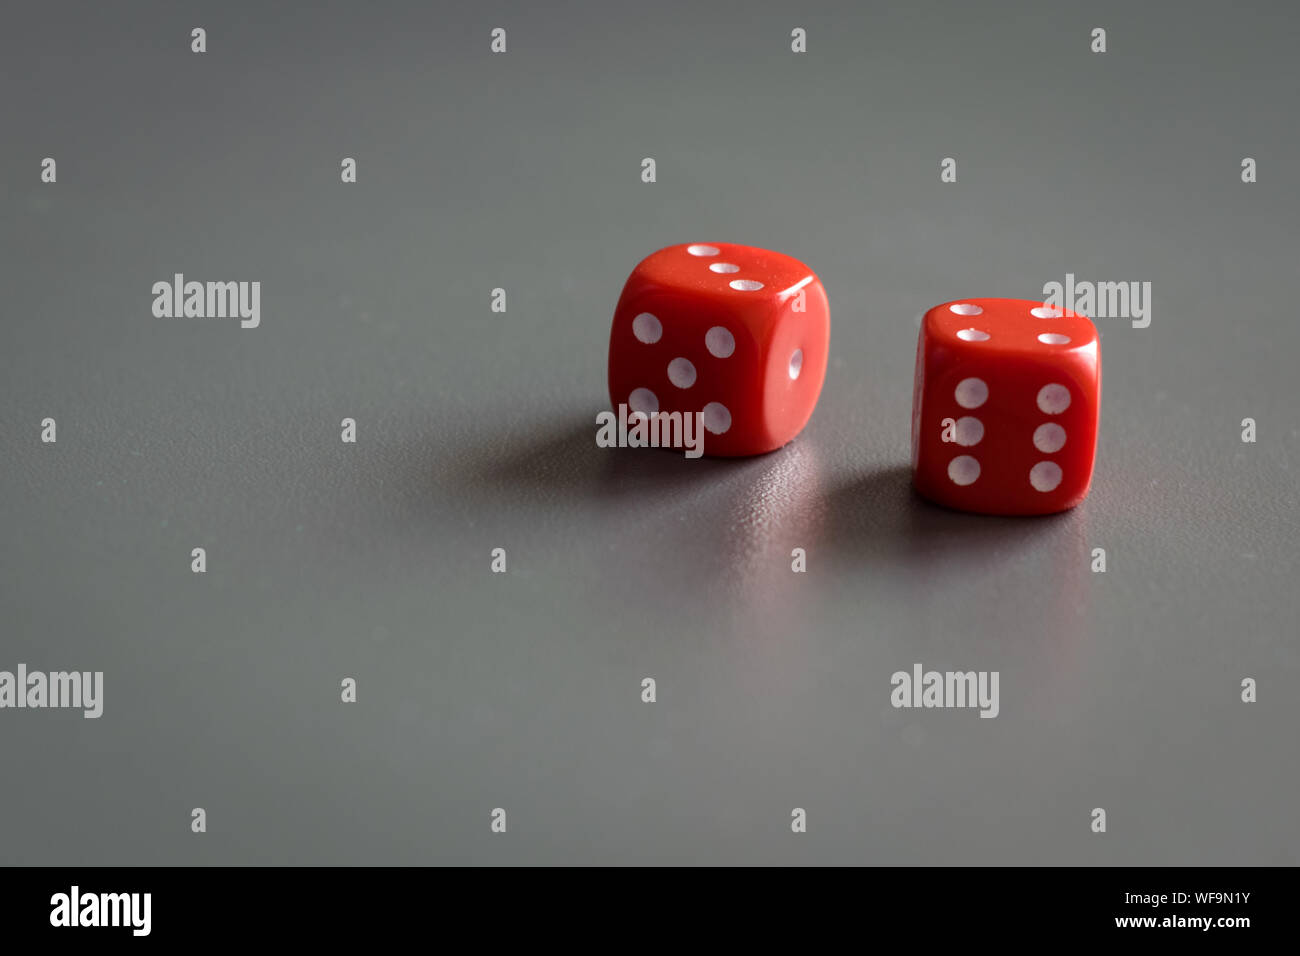 Two red dice isolated on grey background Stock Photo